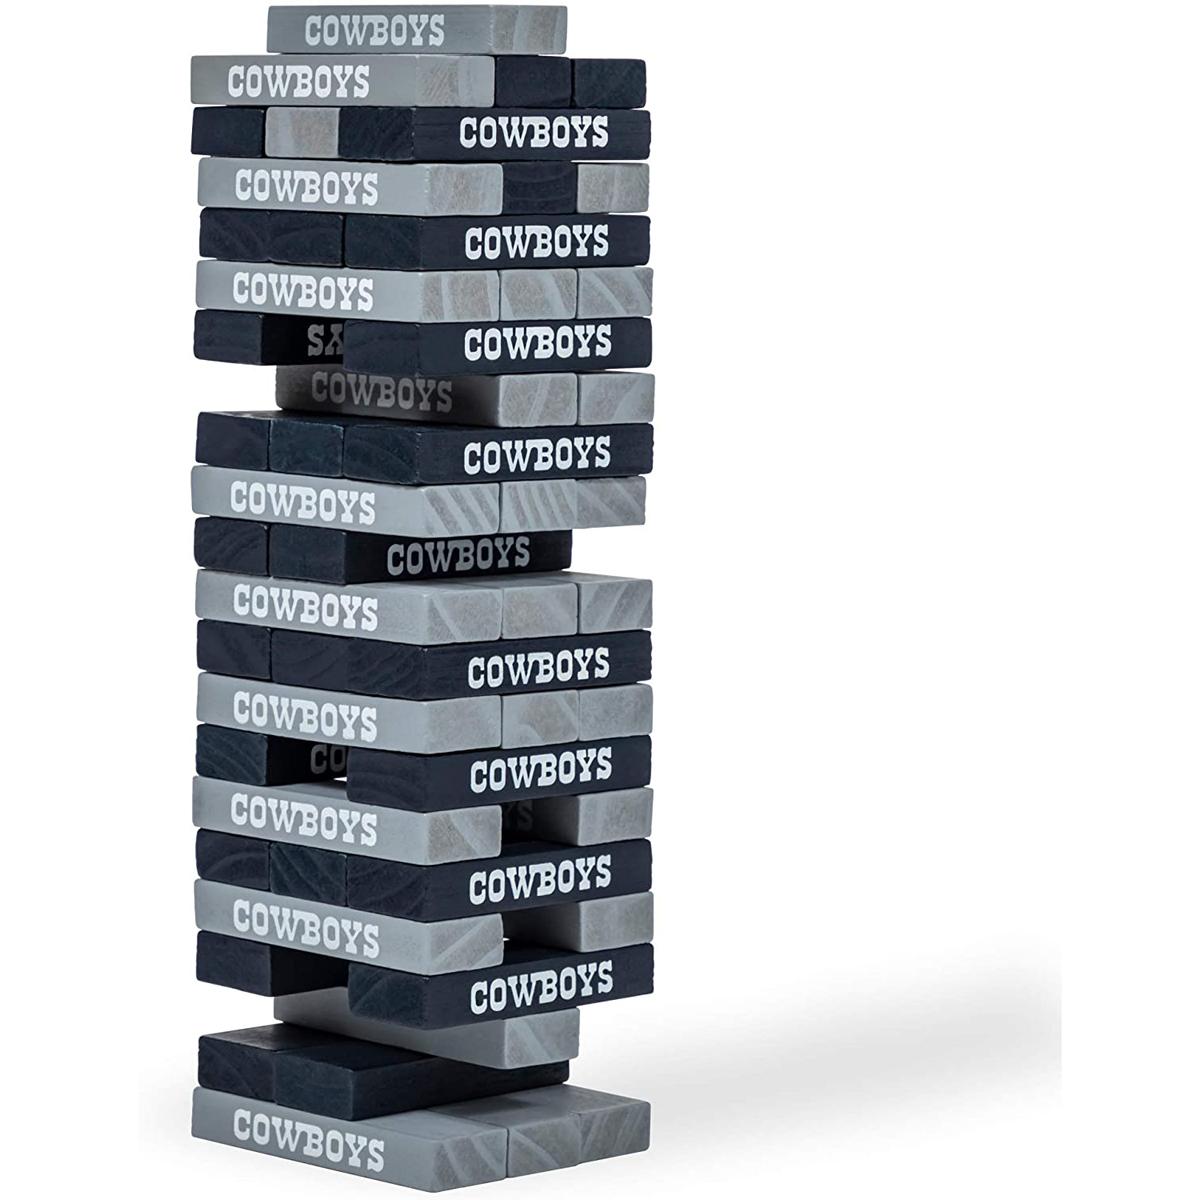 NFL Pro Football Tabletop Stackers Jenga Block Game for $14.39